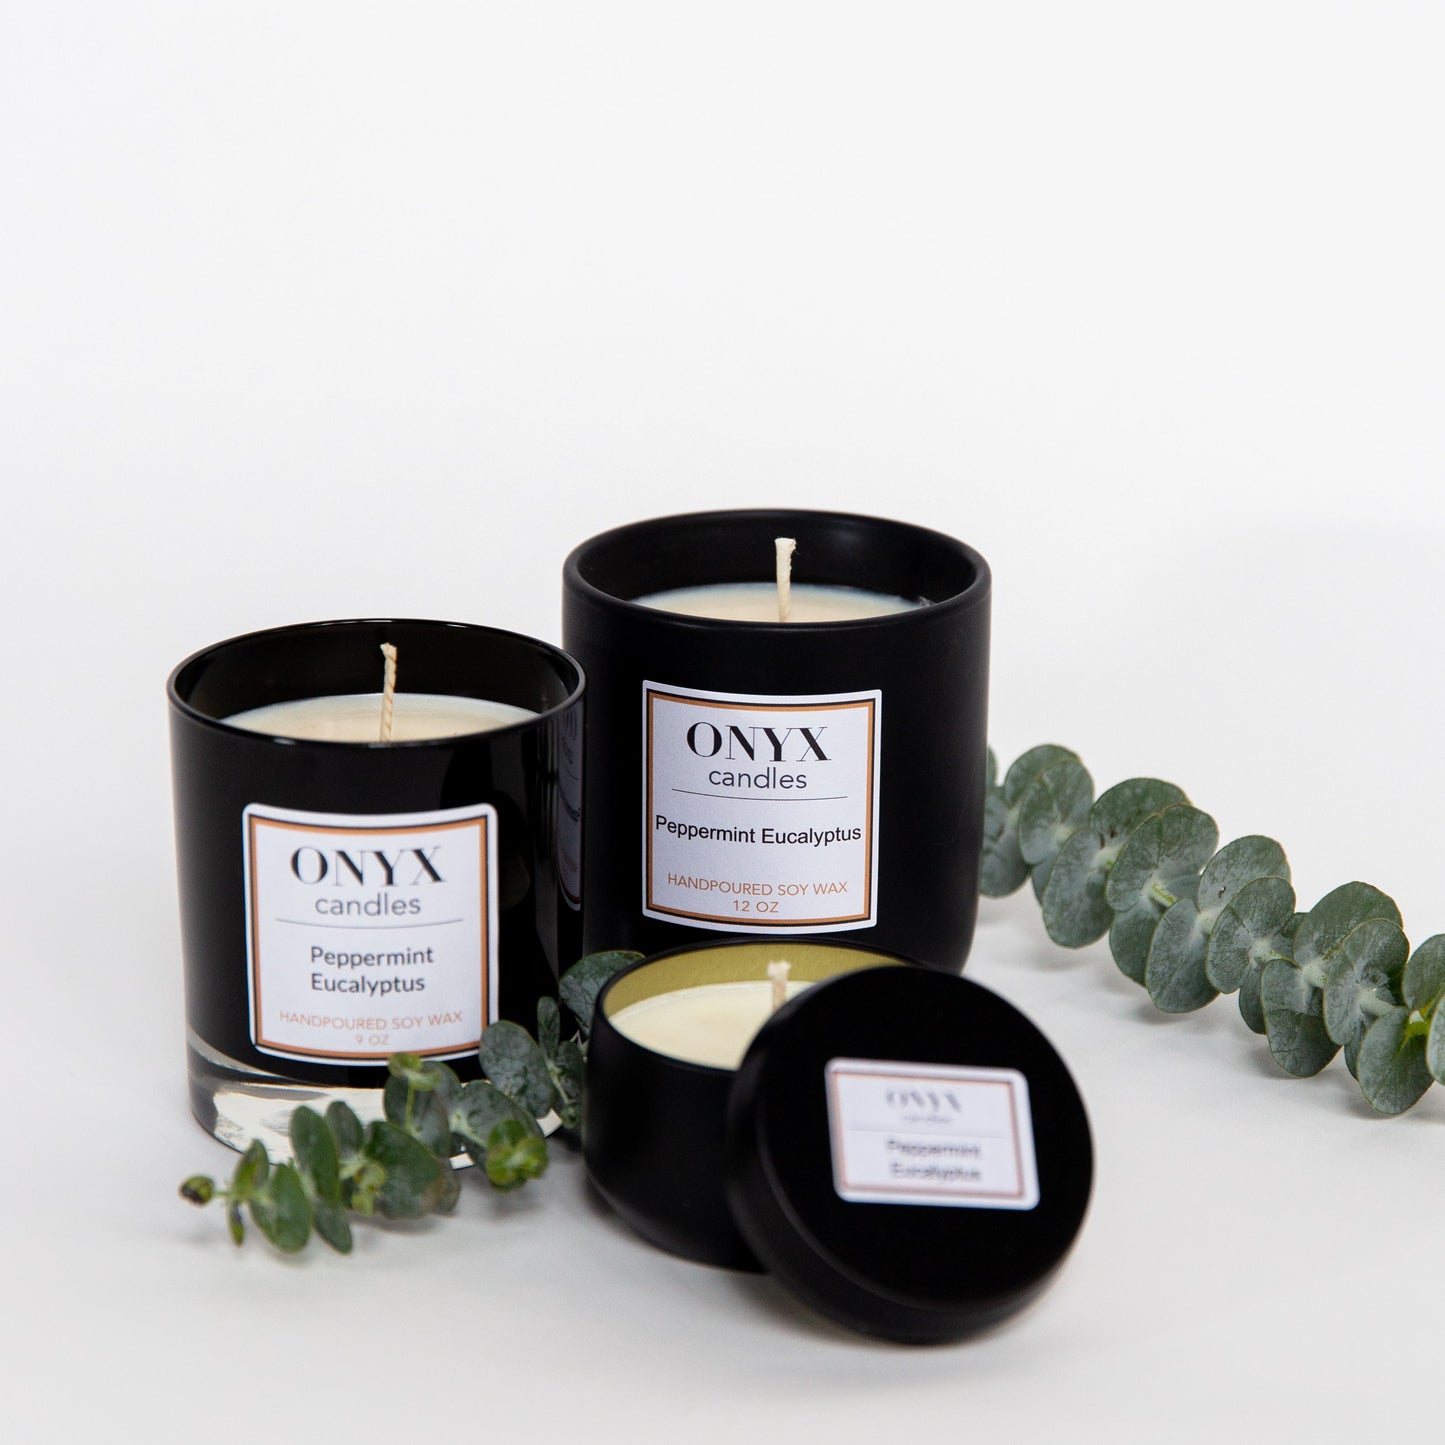 Peppermint Eucalyptus candle variants, from left to right are the 9oz black glass jar option, the 12oz matte black ceramic option, and  the 4oz matte black tin